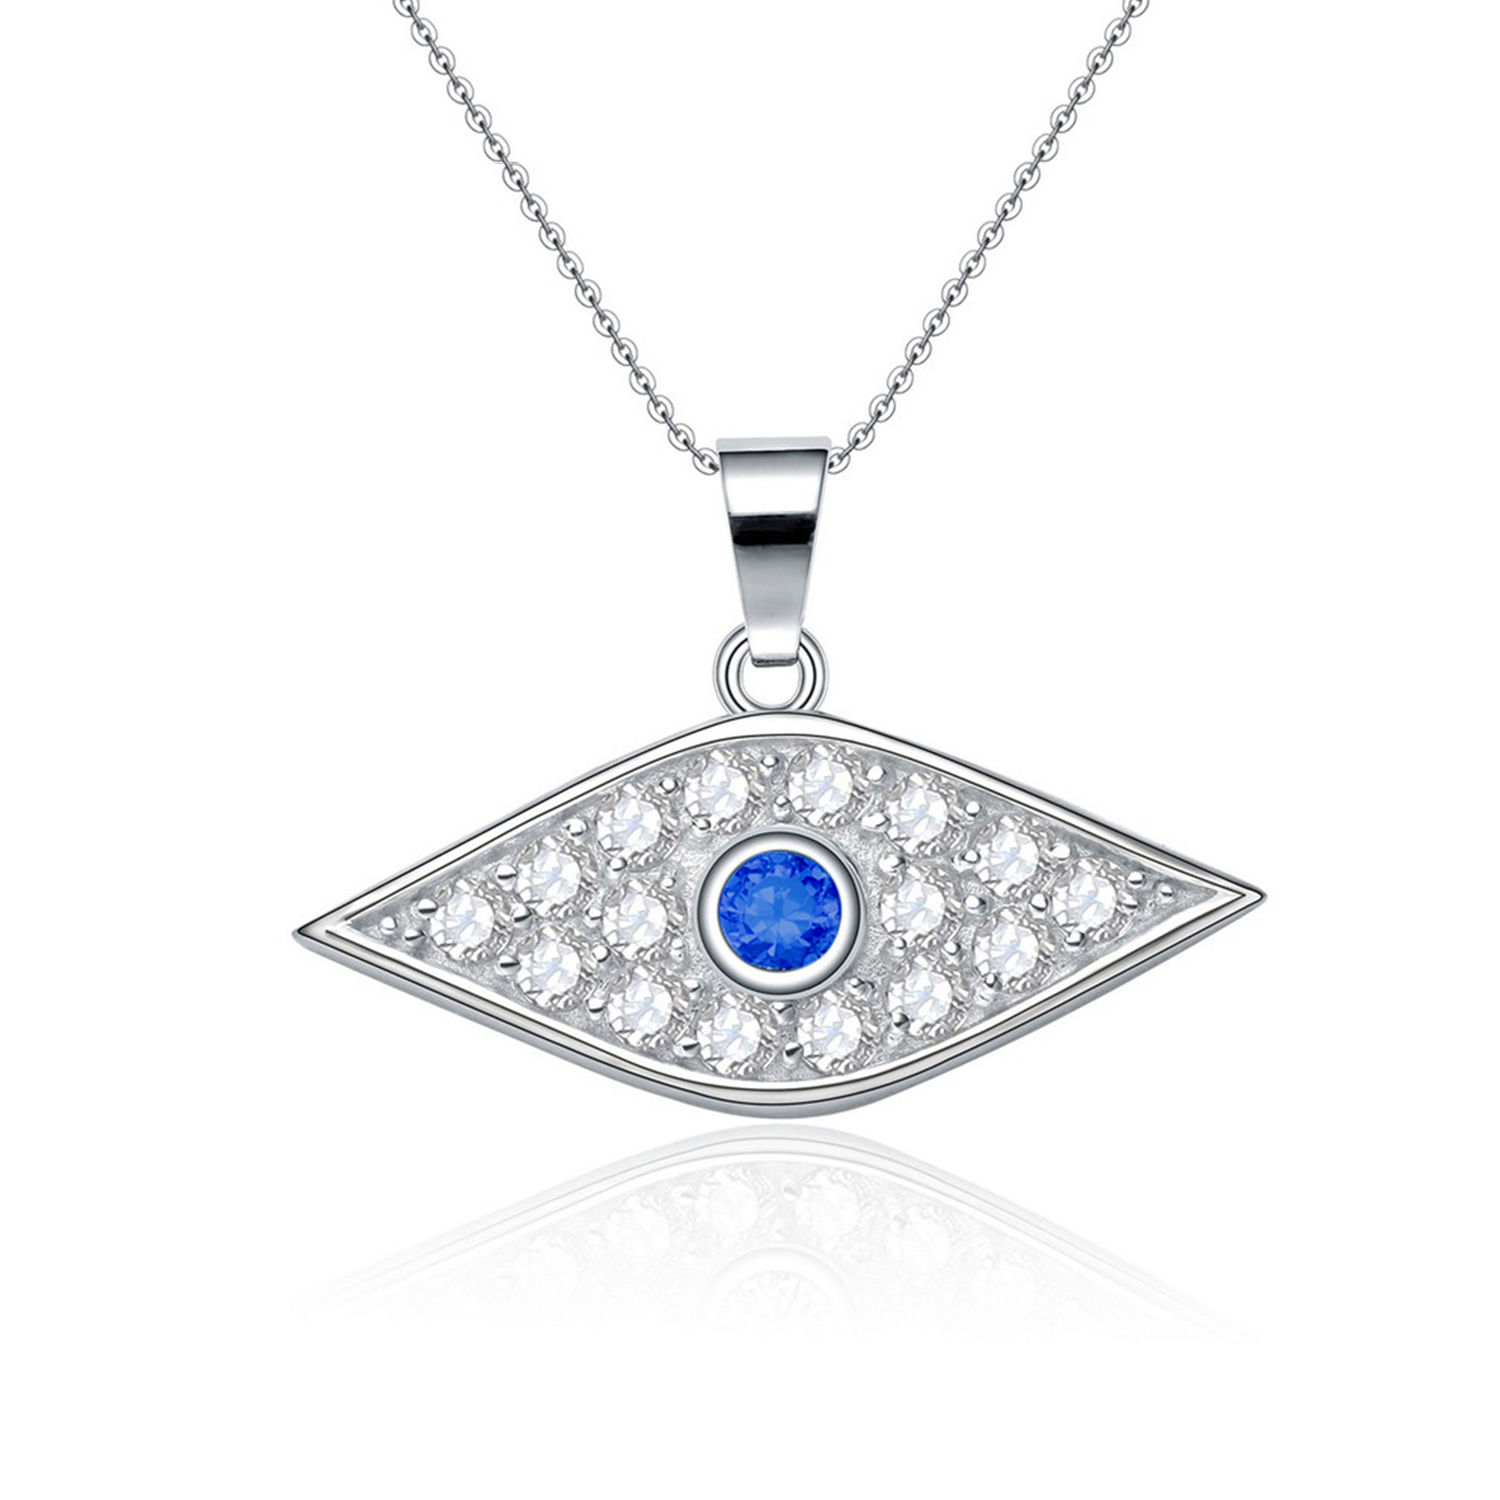 Factory Necklace Jewelry women 925 Sterling Silver Cubic Zirconia Blue White CZ Pendant Eye Necklace(图4)